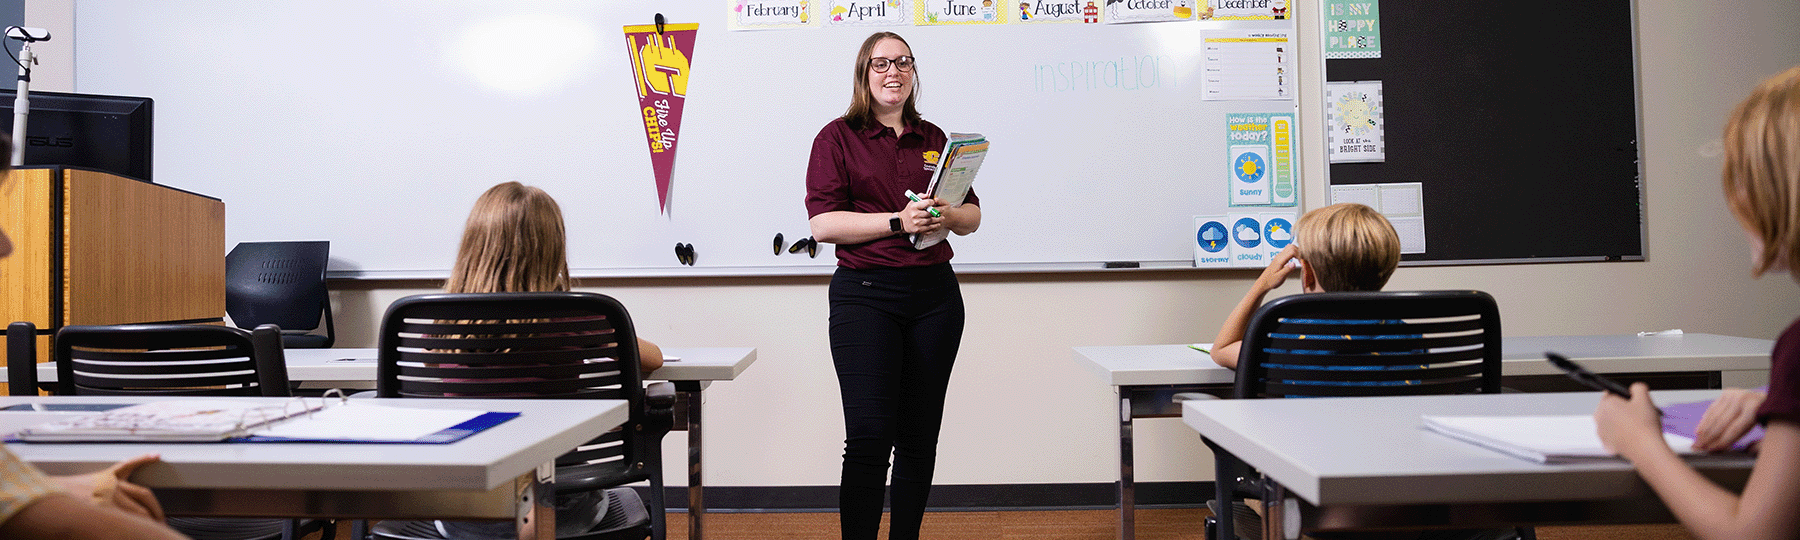 Teacher standing against a whiteboard in front of her students, holding a notebook and smiling while teaching.